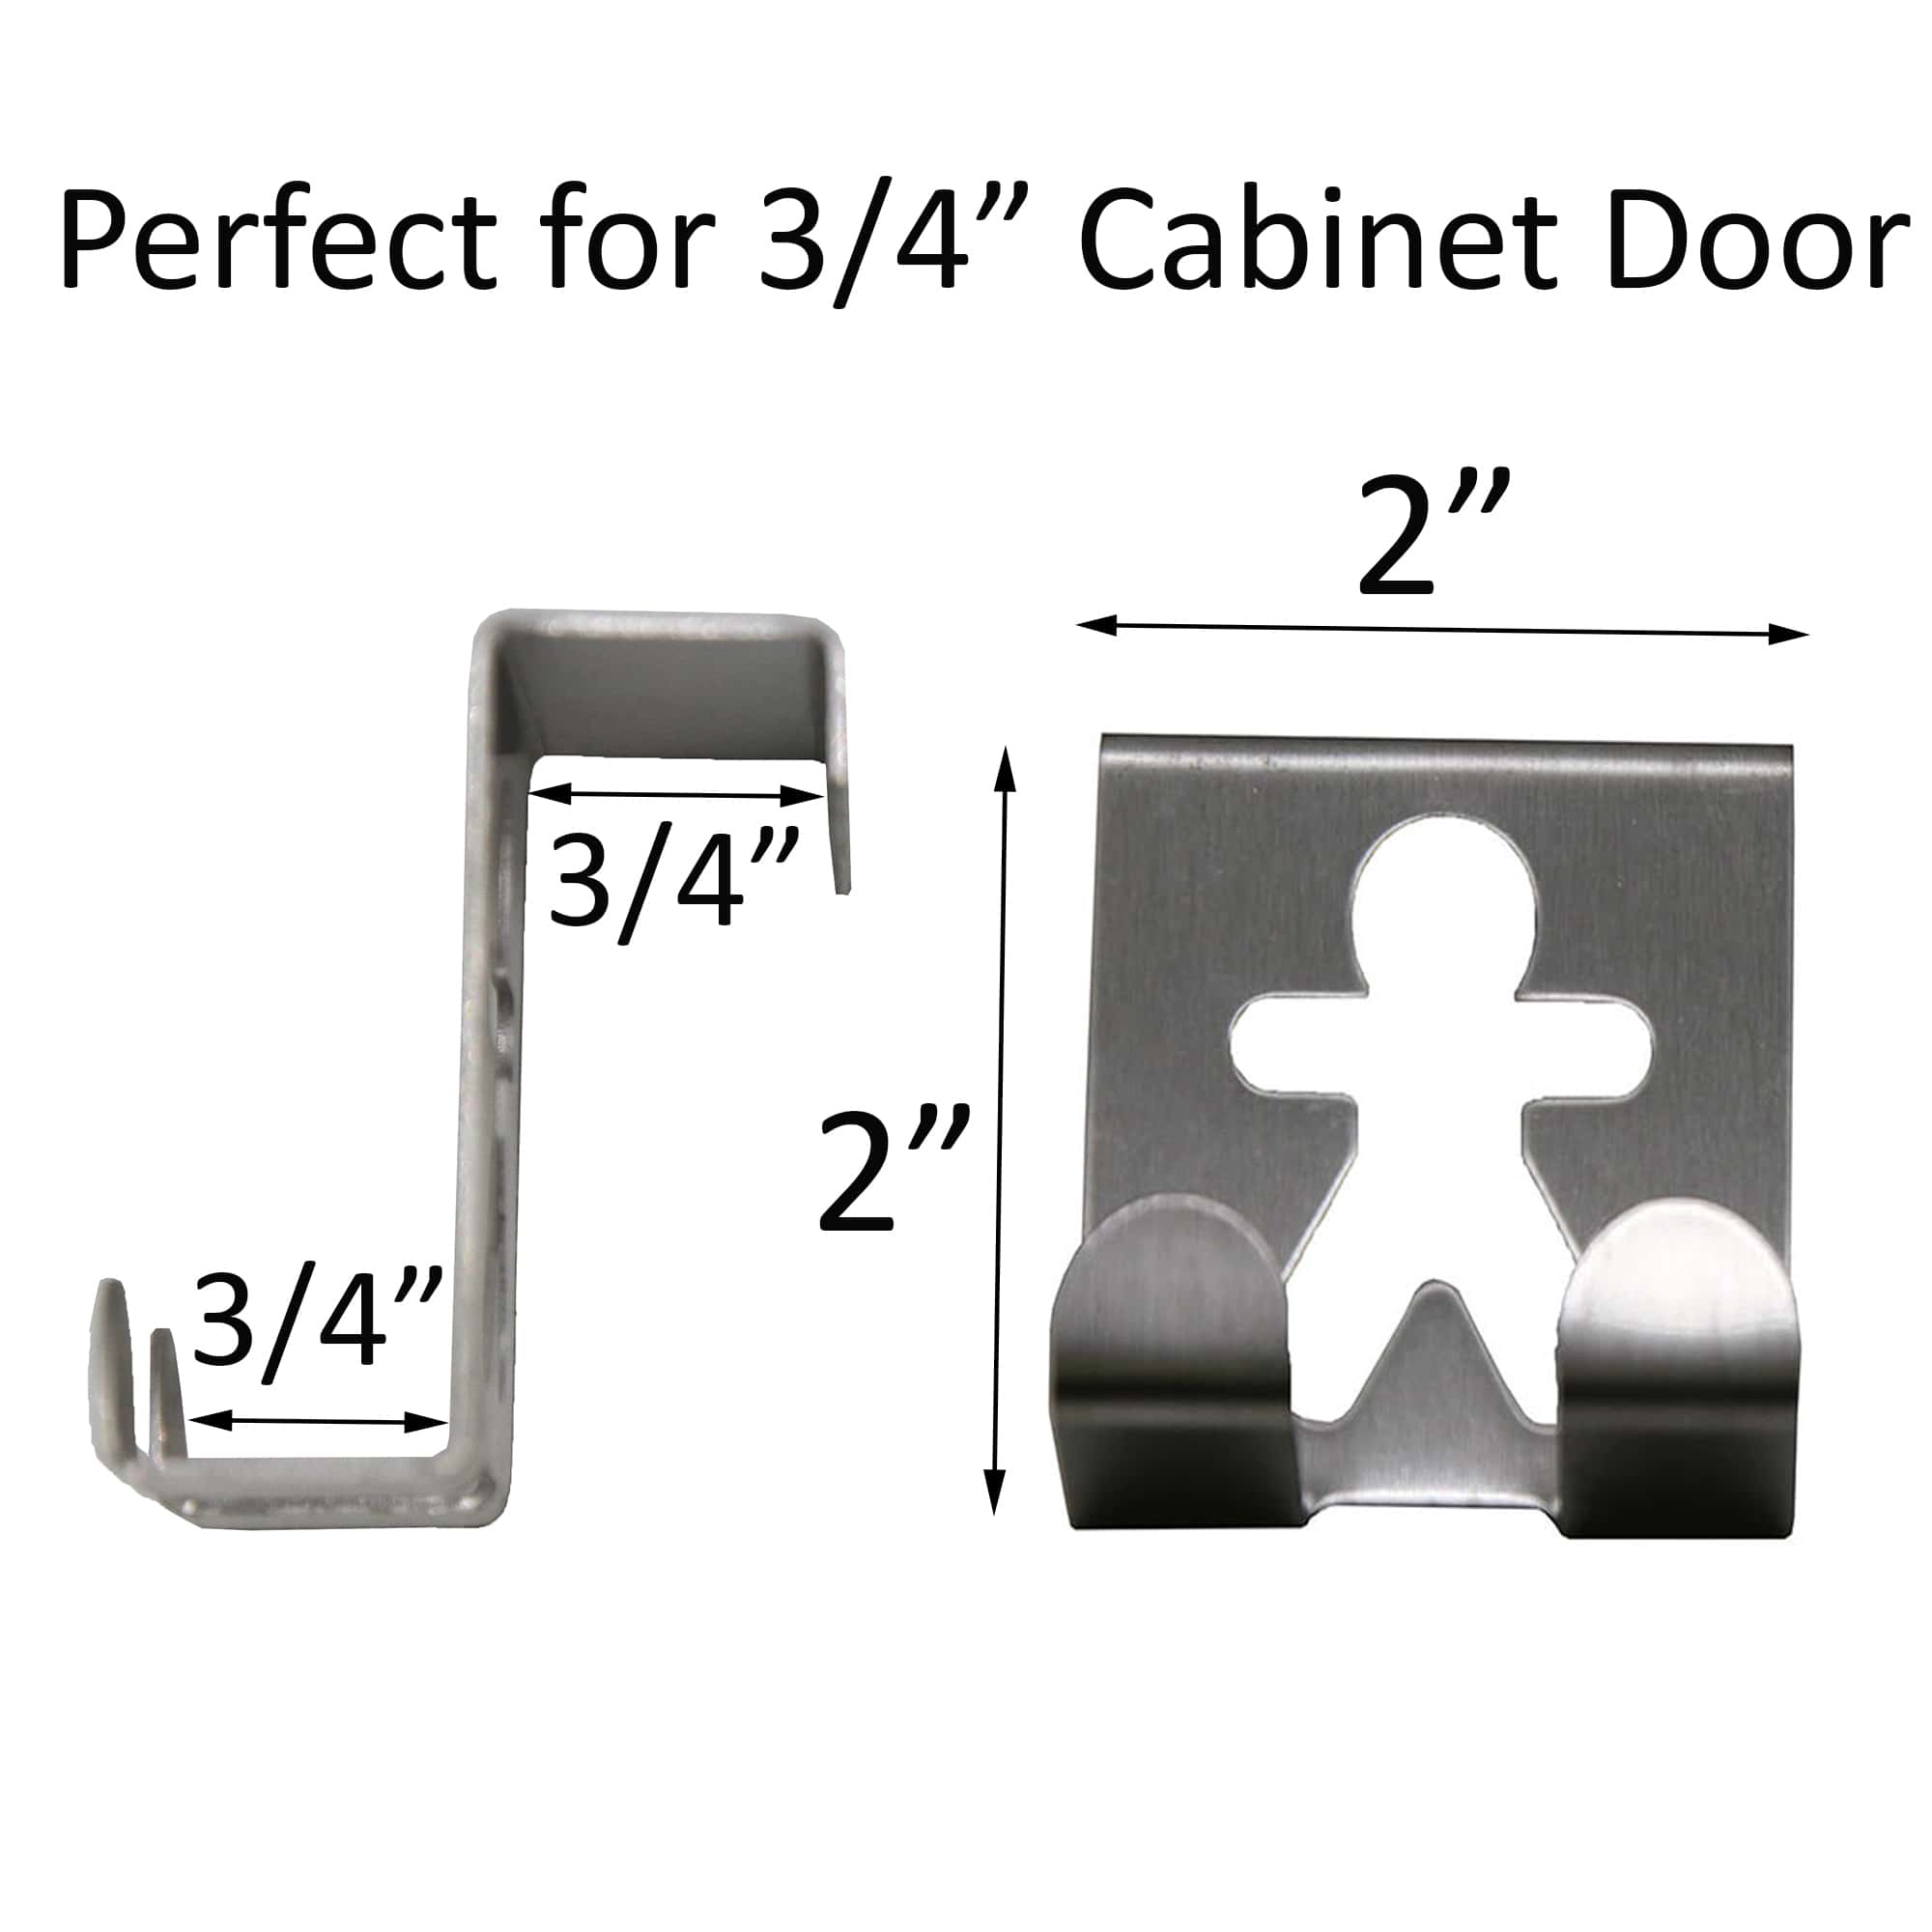 Over The Cabinet Door Double Hooks - Man Man Design- Set of 2- Chrome- Stainless Steel